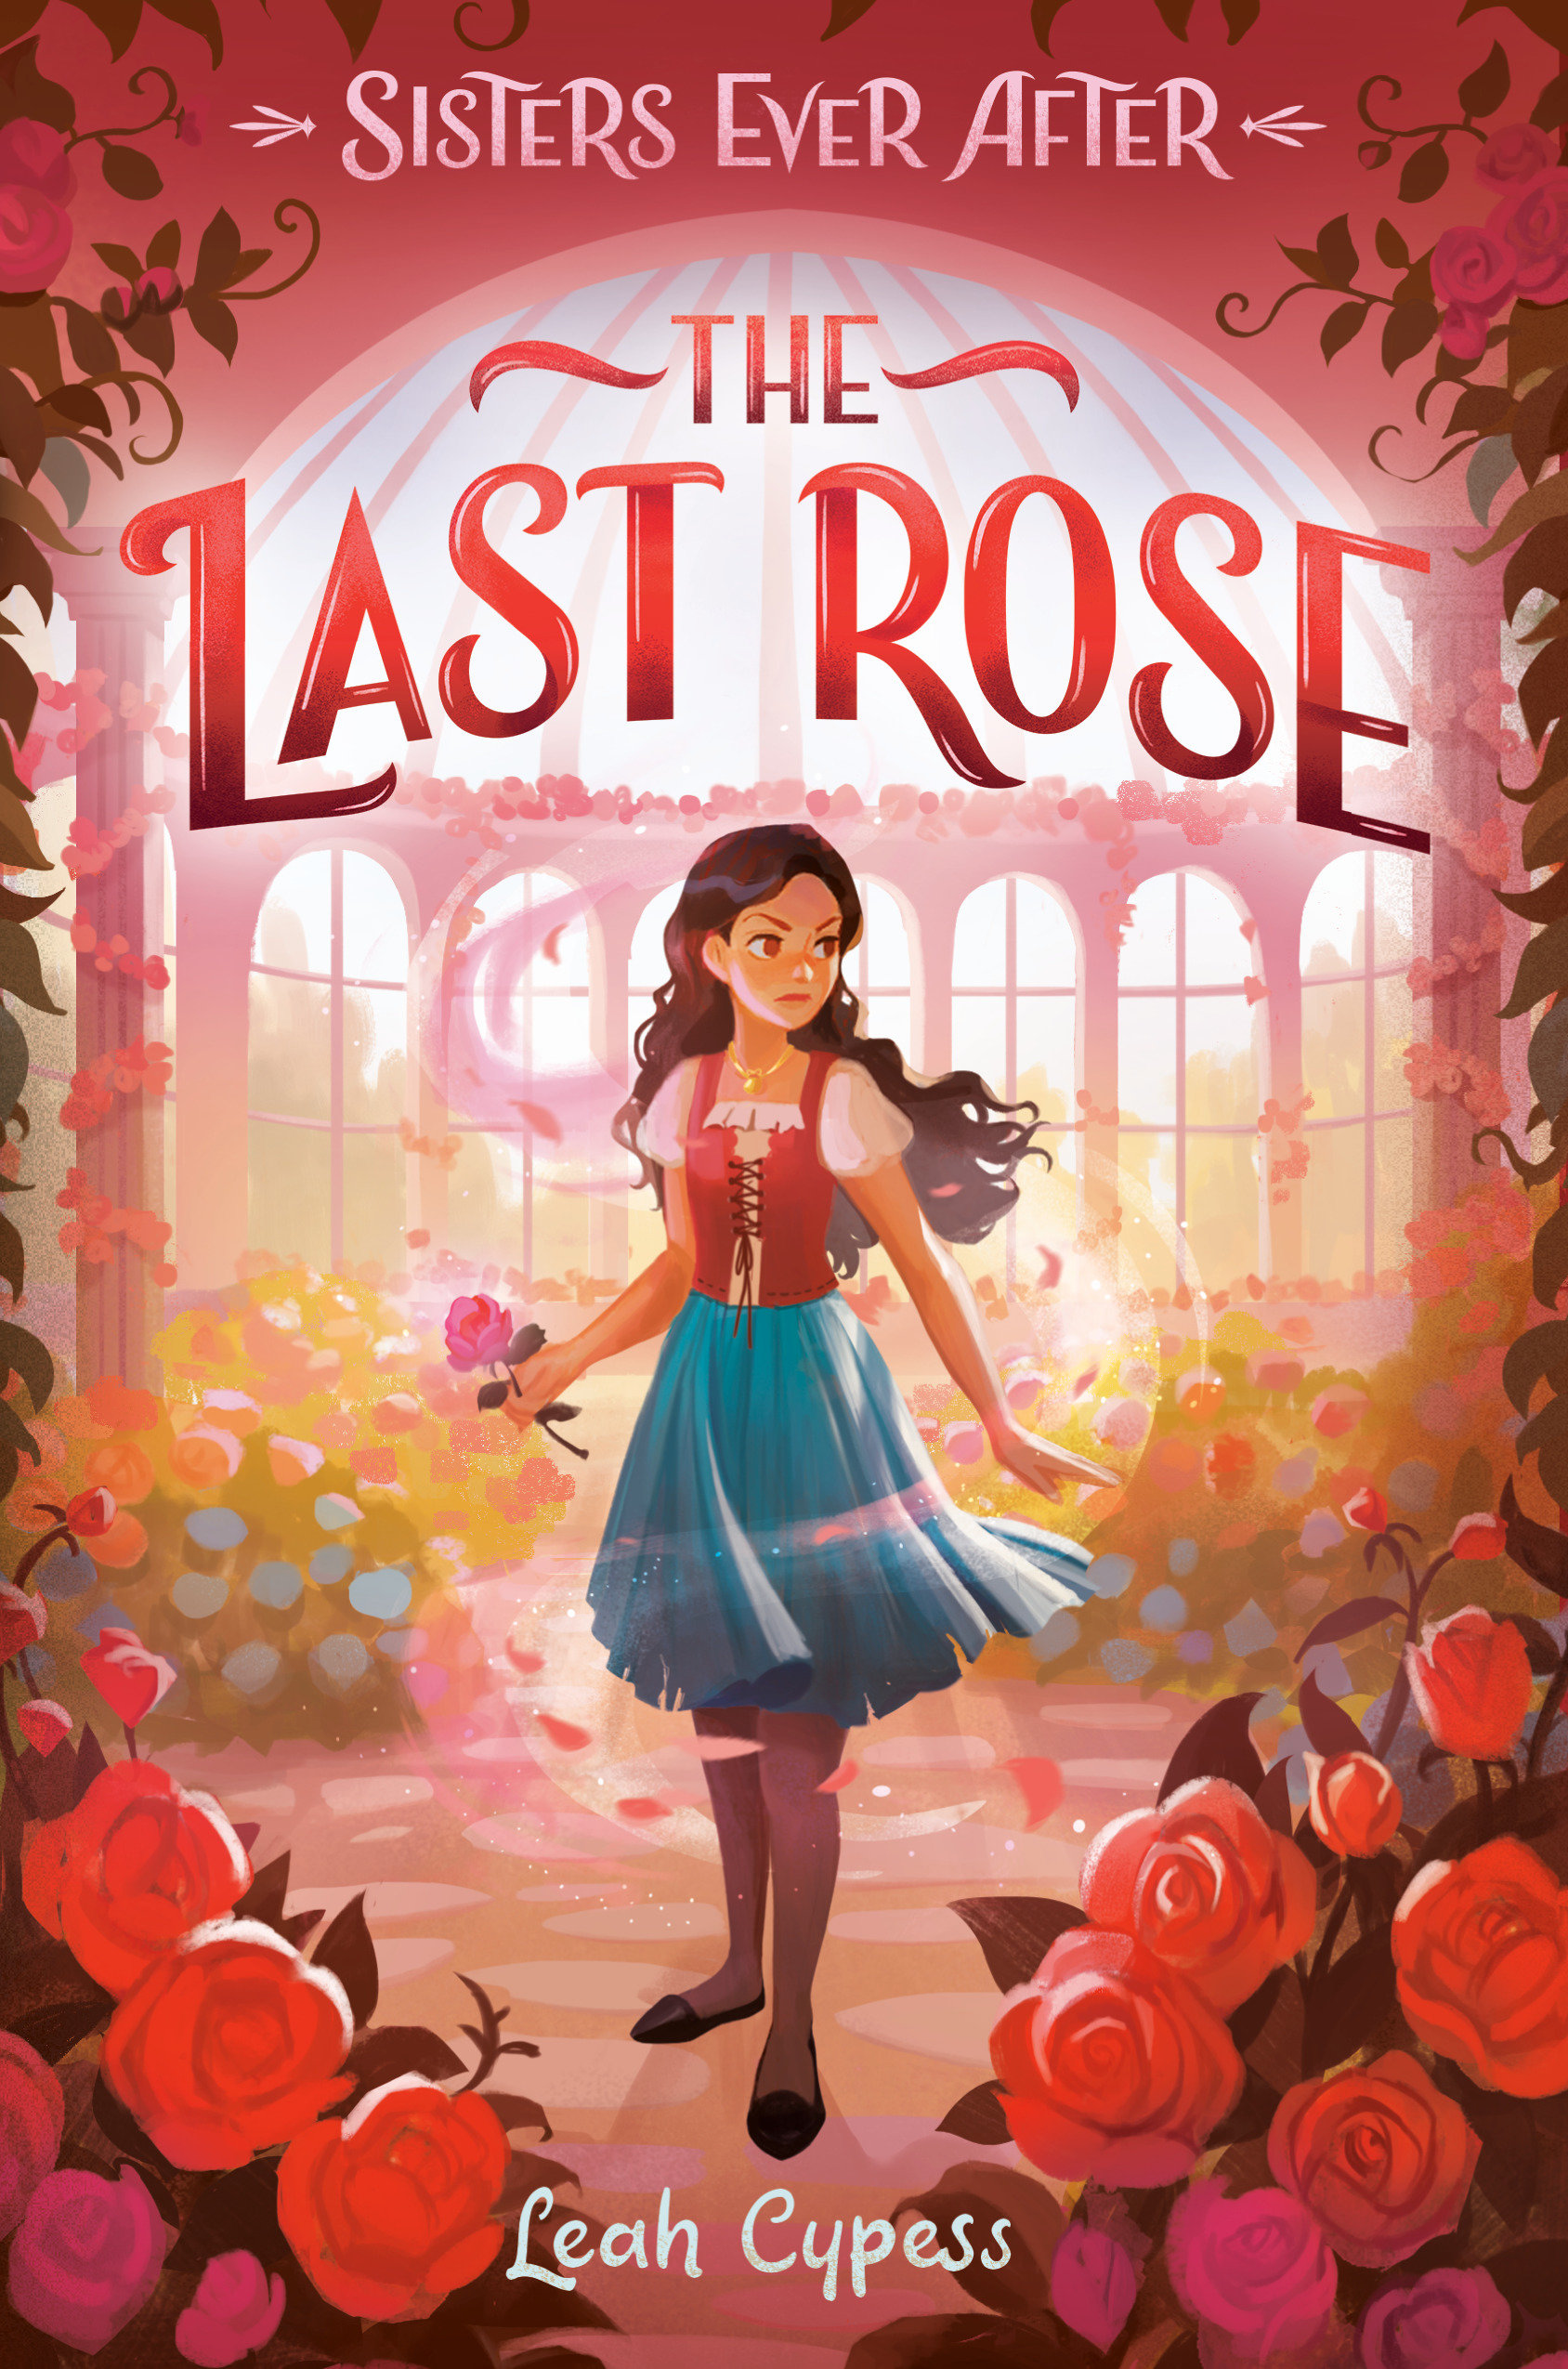 The Last Rose (Hardcover Book)